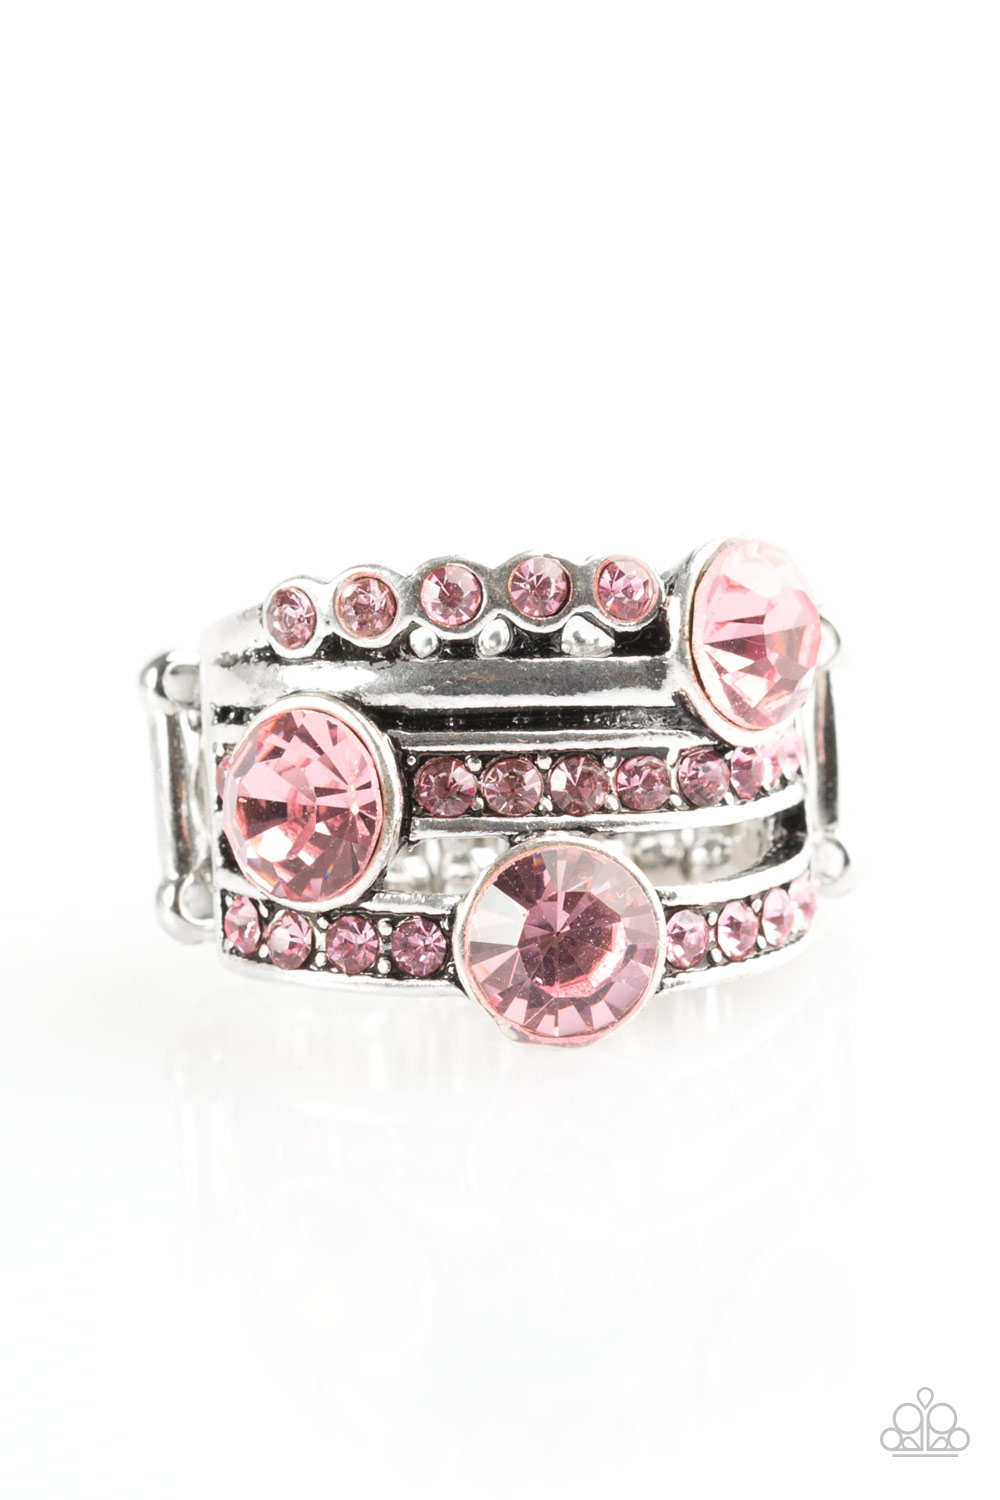 Paparazzi Accessories: Hollywood Glamour - Pink | Paparazzi Accessories